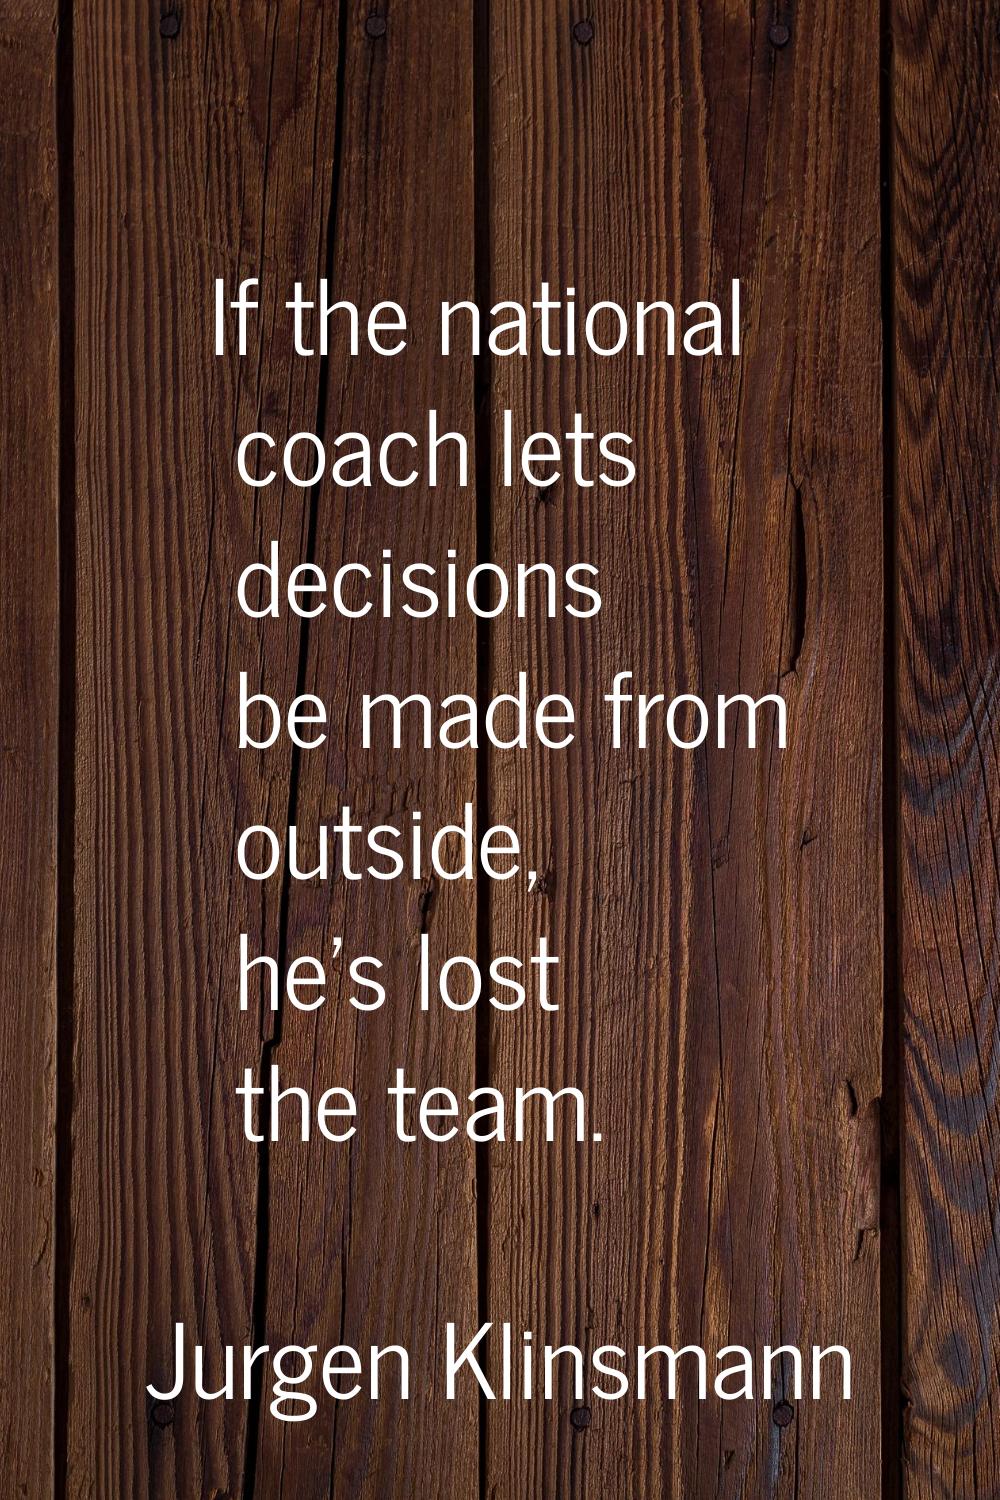 If the national coach lets decisions be made from outside, he's lost the team.